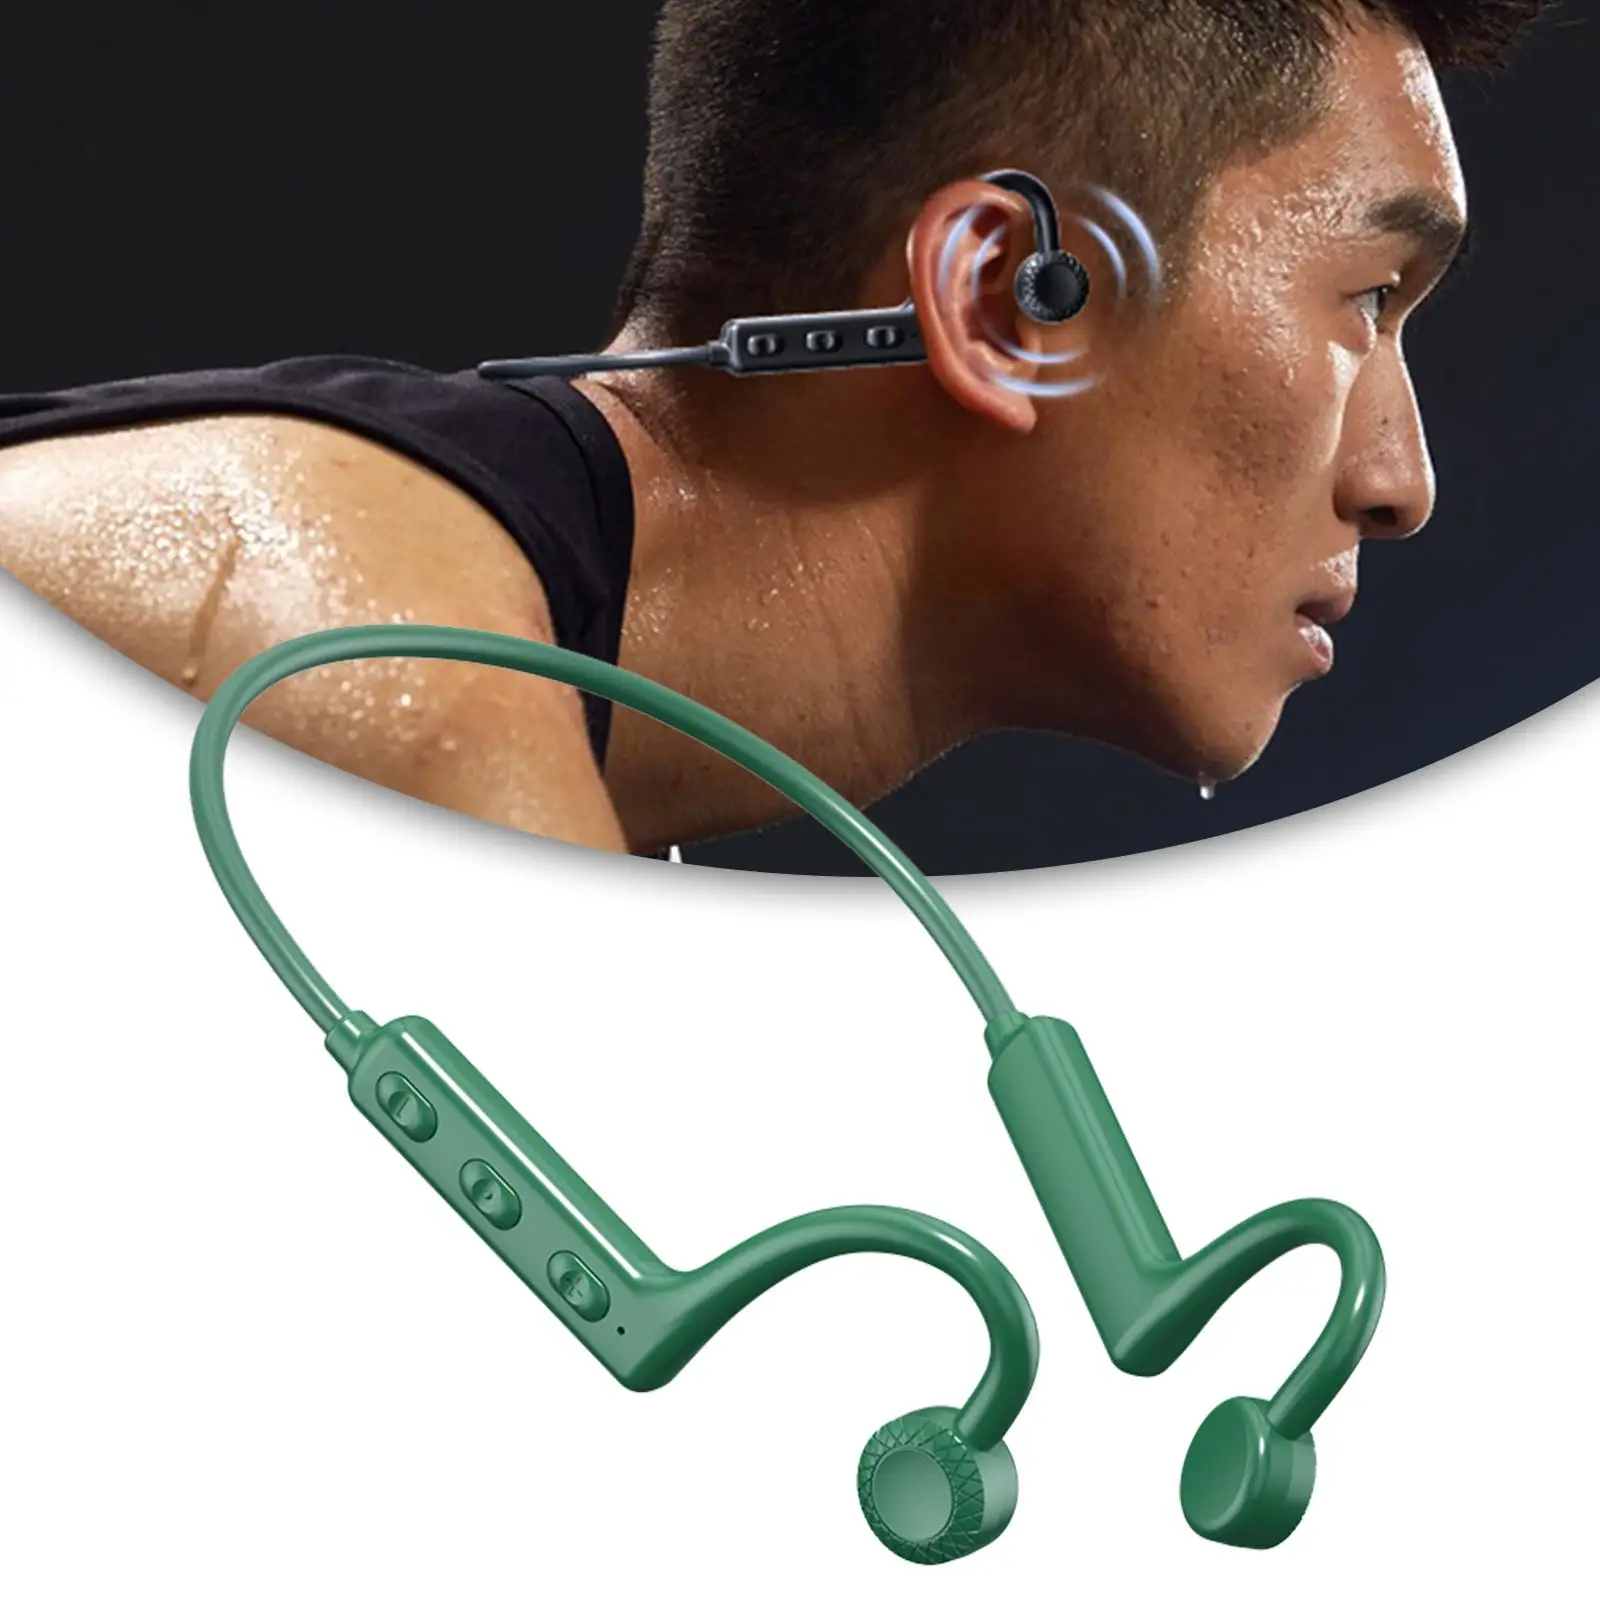 Bone Conduction Headphones Sweat Resistant Open Ear Headset for Running Workout Sports